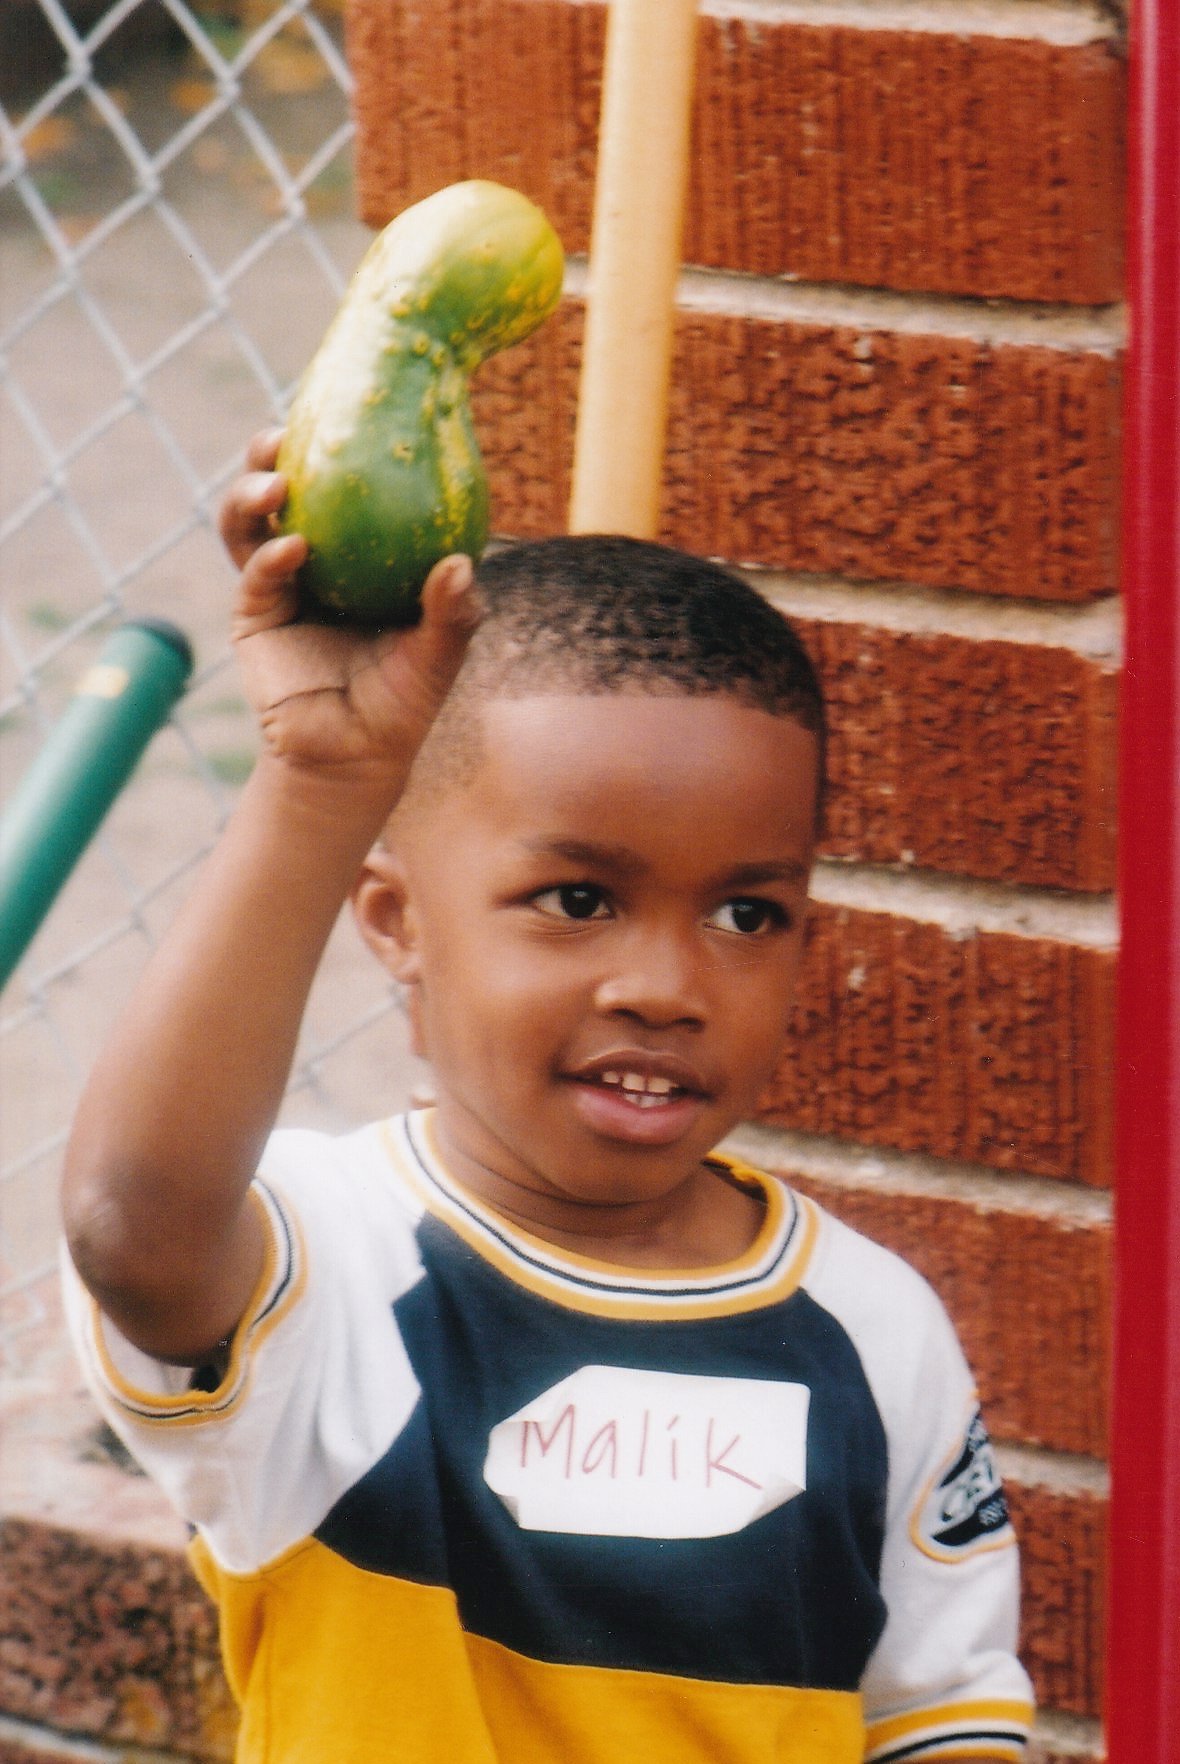   ArtEsteem youth holding a cucumber grown in the garden at 3278 West Street.  